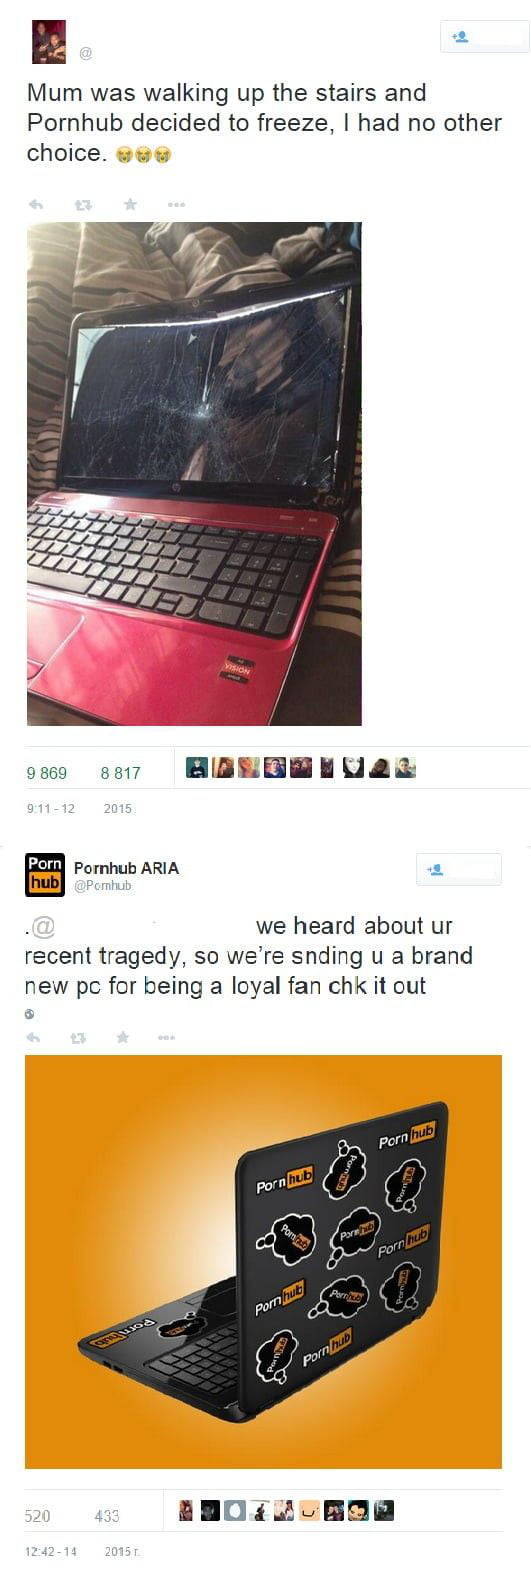 pornhub decided to freeze had no choice - Mum was walking up the stairs and Pornhub decided to freeze, I had no other choice. U 9 8698817 Dance 12 2015 Porn Pornhub Aria hubPornhub we heard about ur recent tragedy, so we're snding u a brand new pc for bei